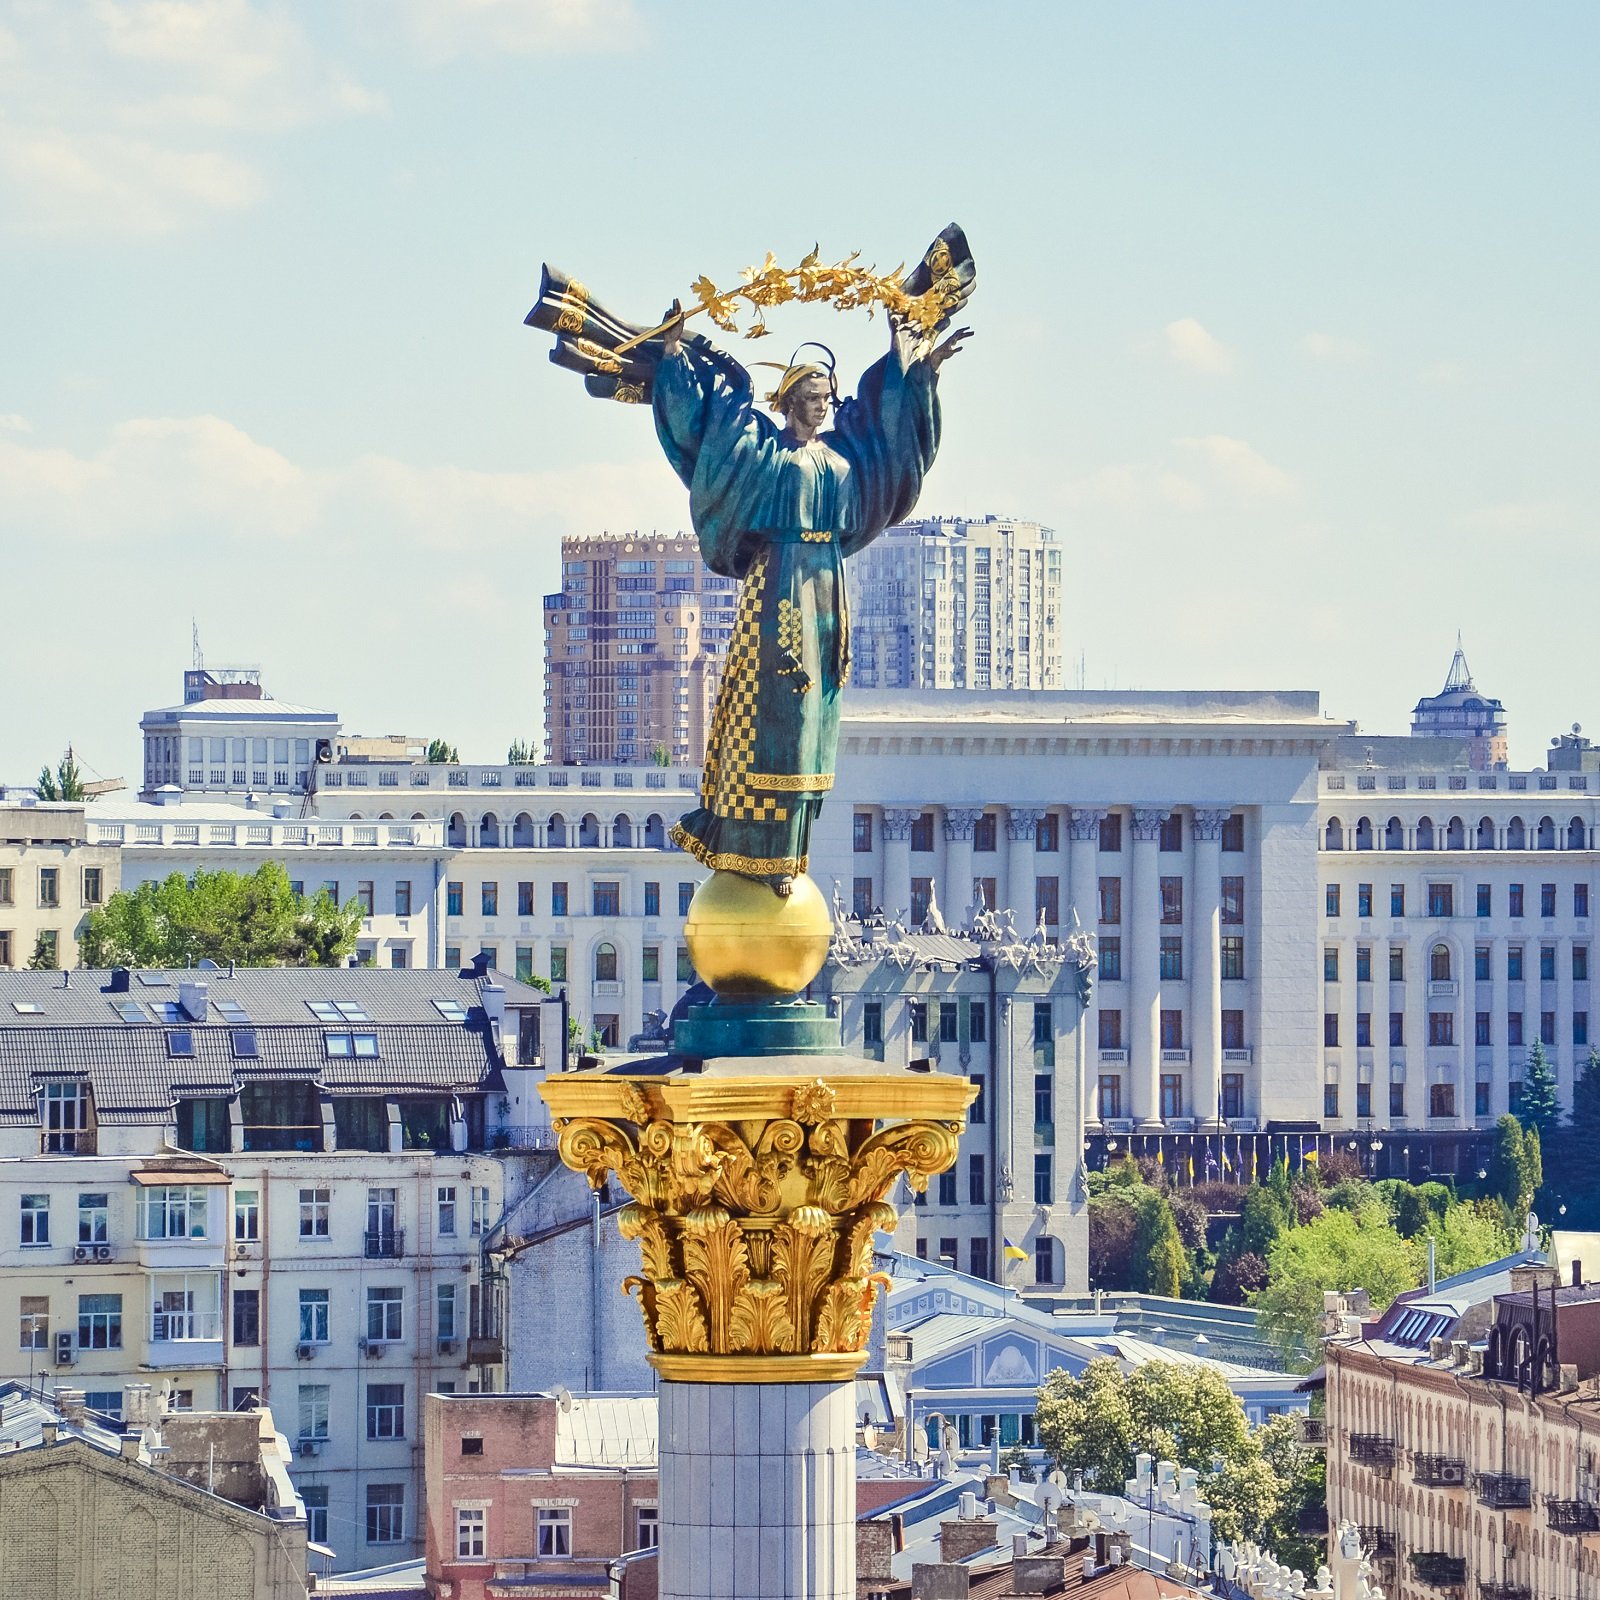 Ukraine Plans to Fully Legalize Cryptocurrencies Within Three Years